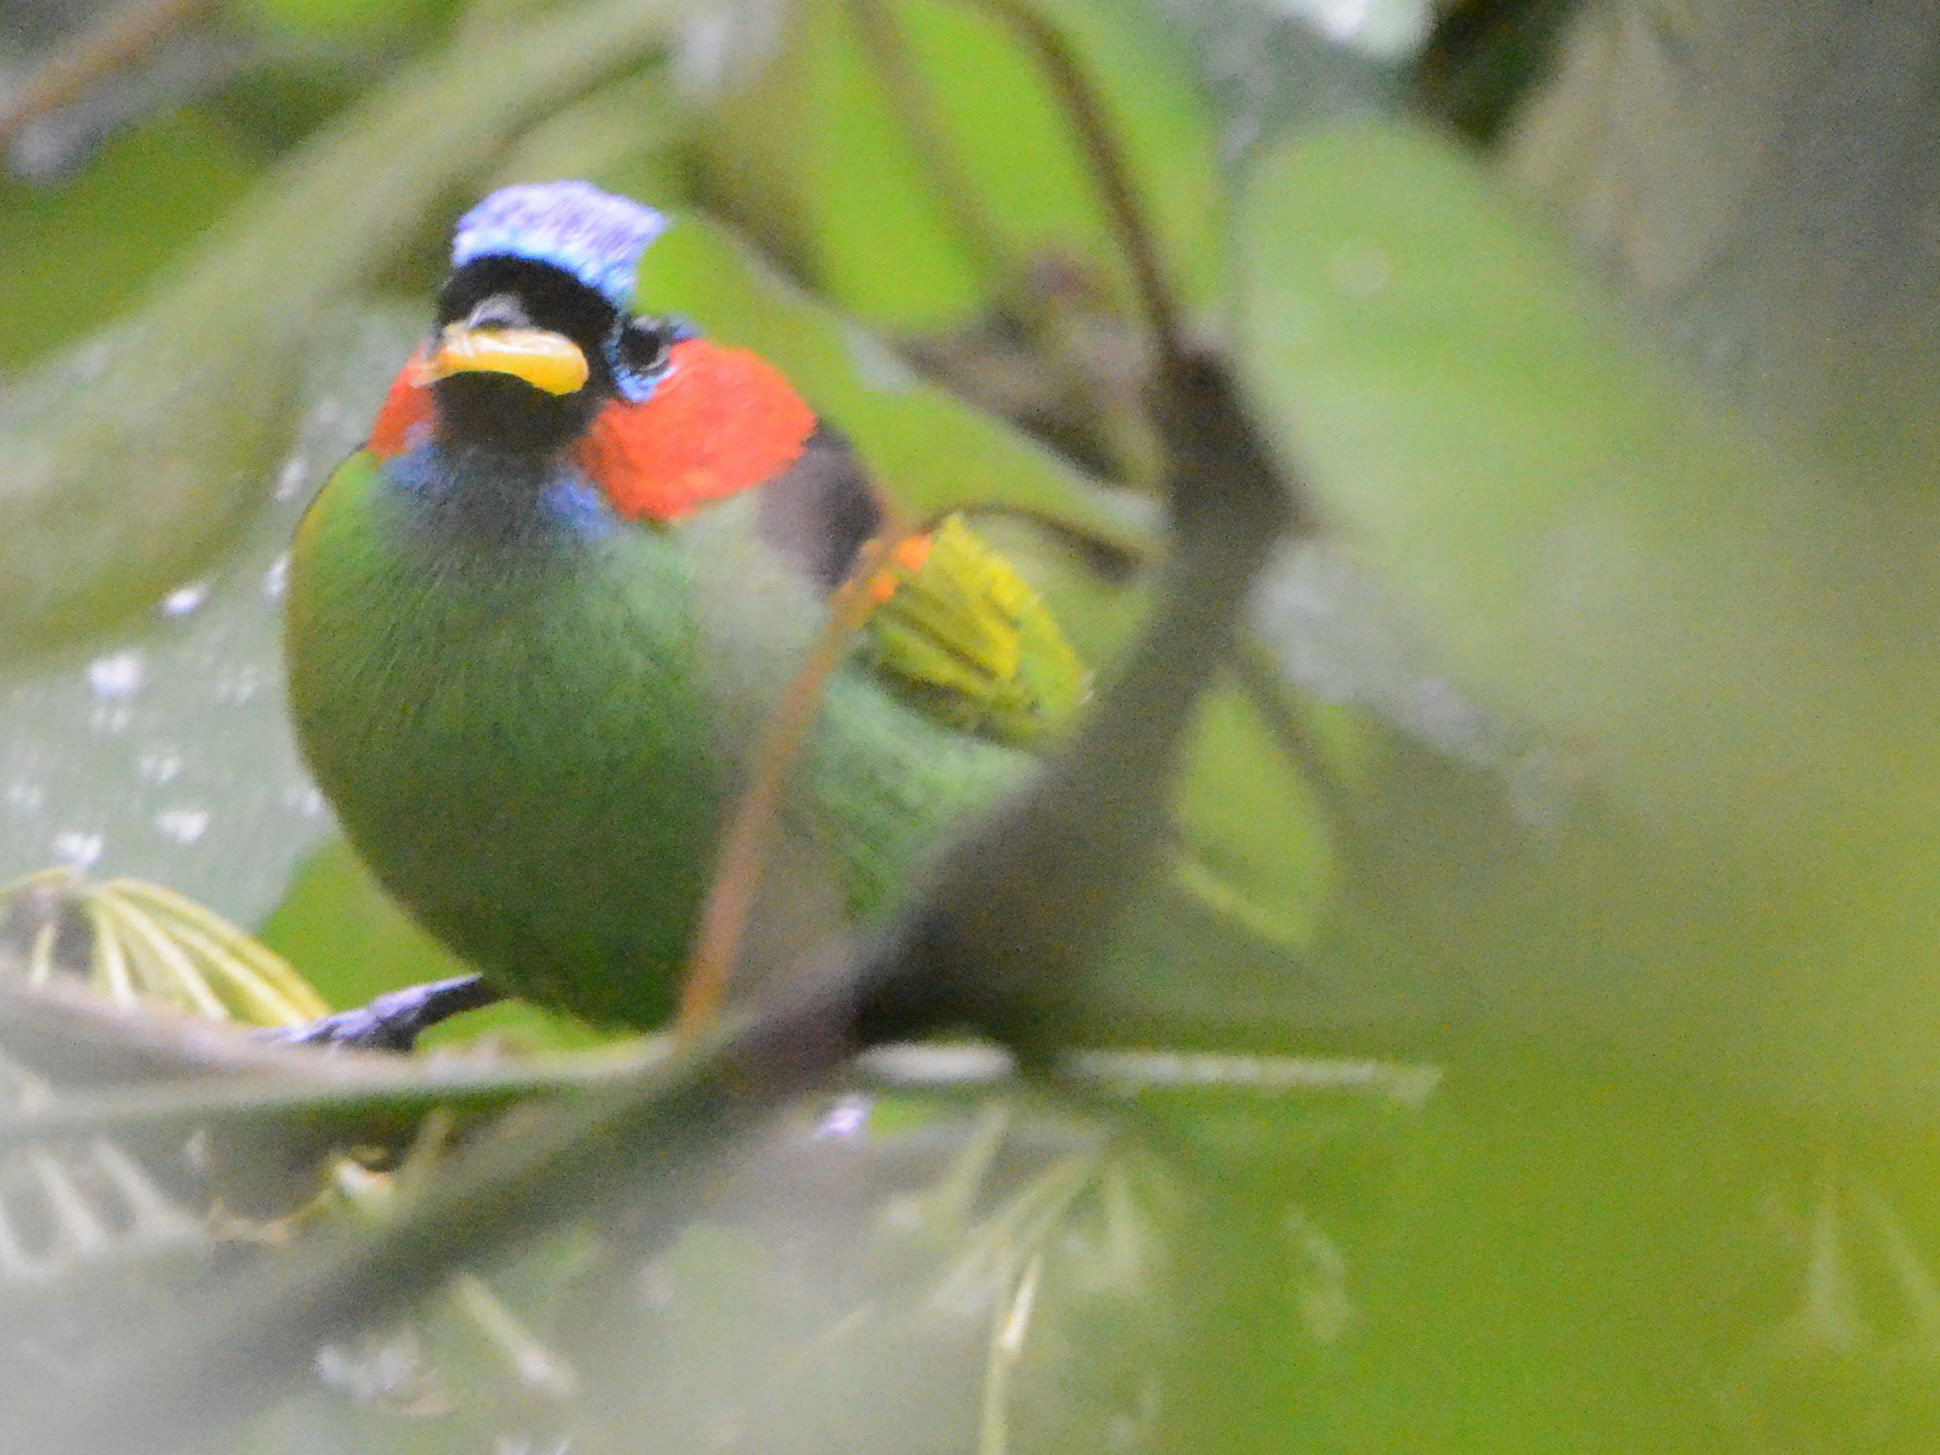 Click picture to see more Red-necked Tanagers.